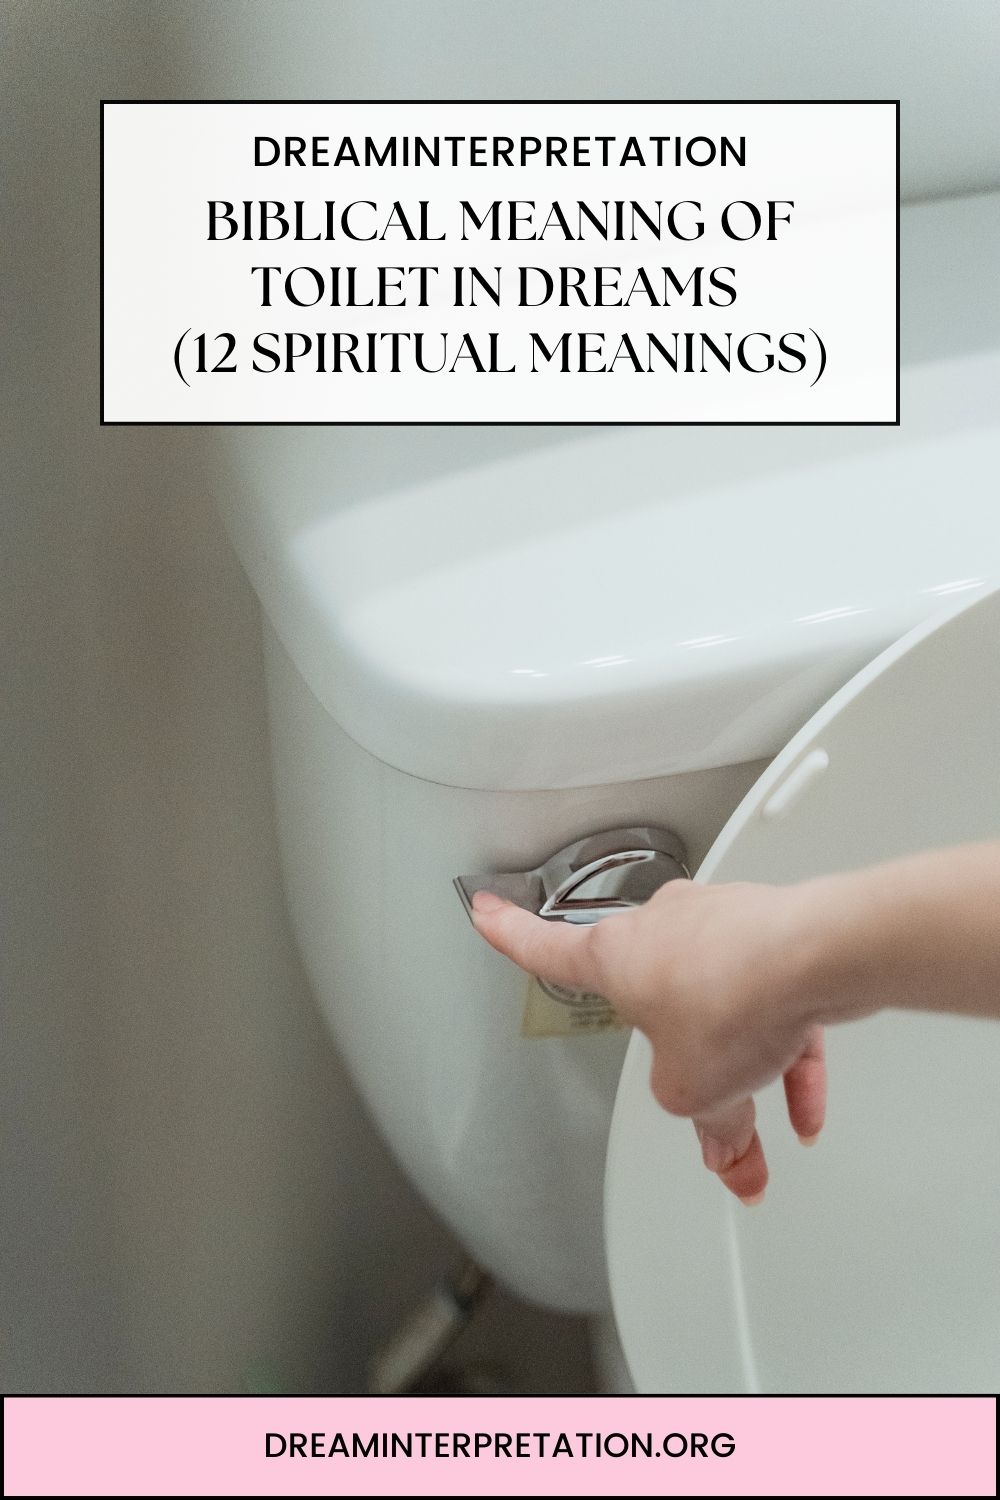 Biblical Meaning Of Toilet In Dreams (12 Spiritual Meanings)